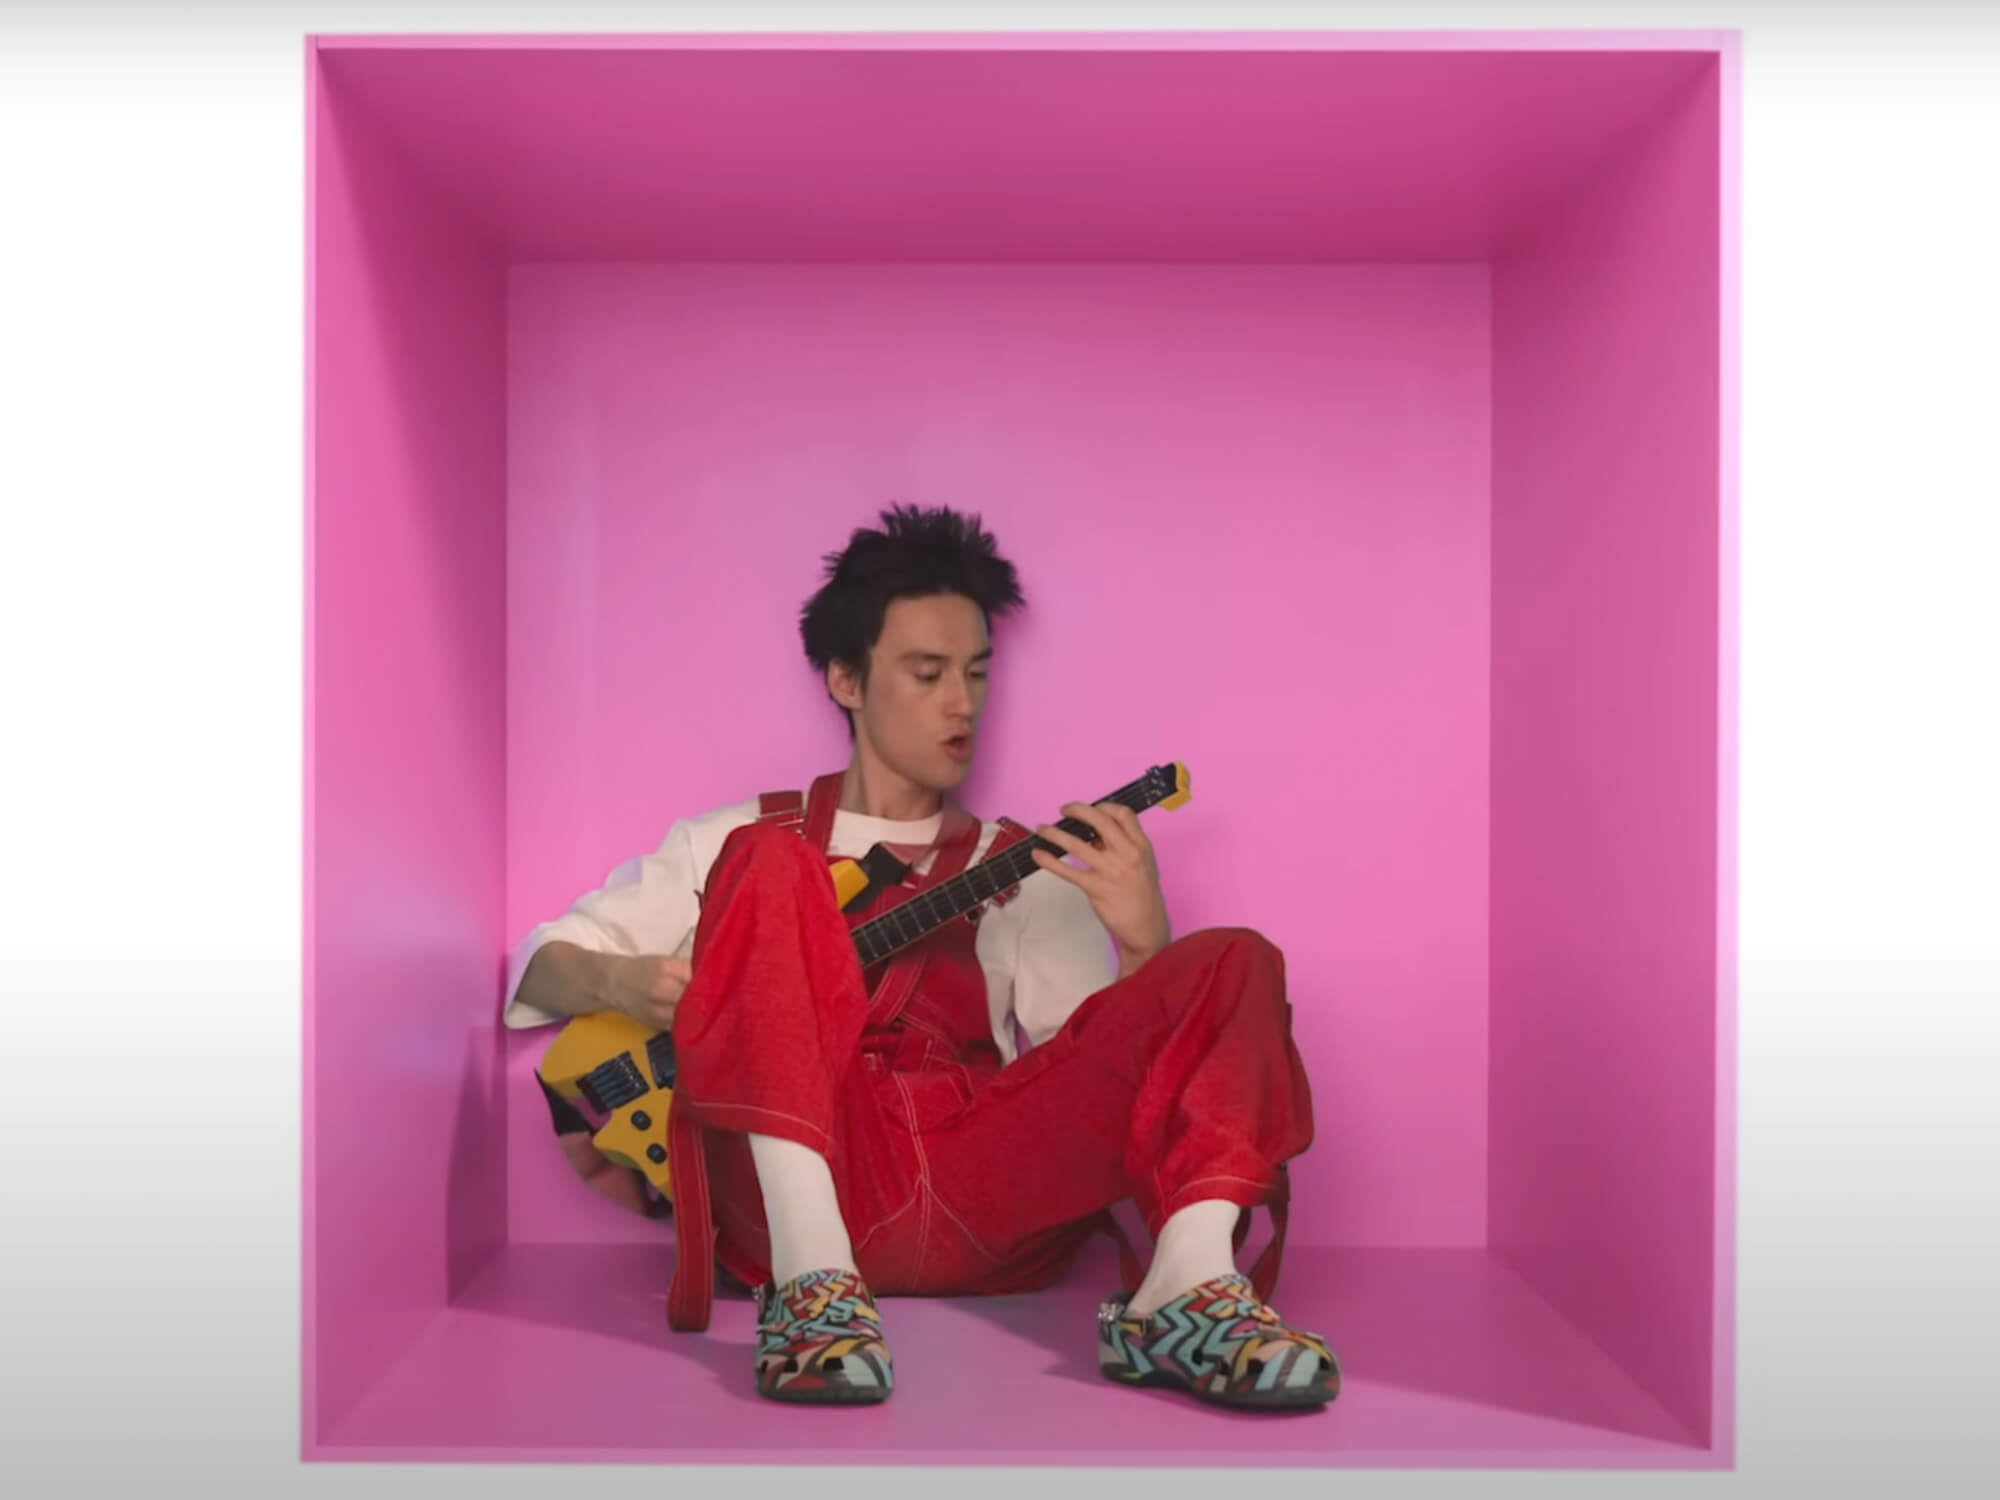 Jacob Collier in the music video for WELLLL. He's sat inside a pink box and is playing the yellow headless model